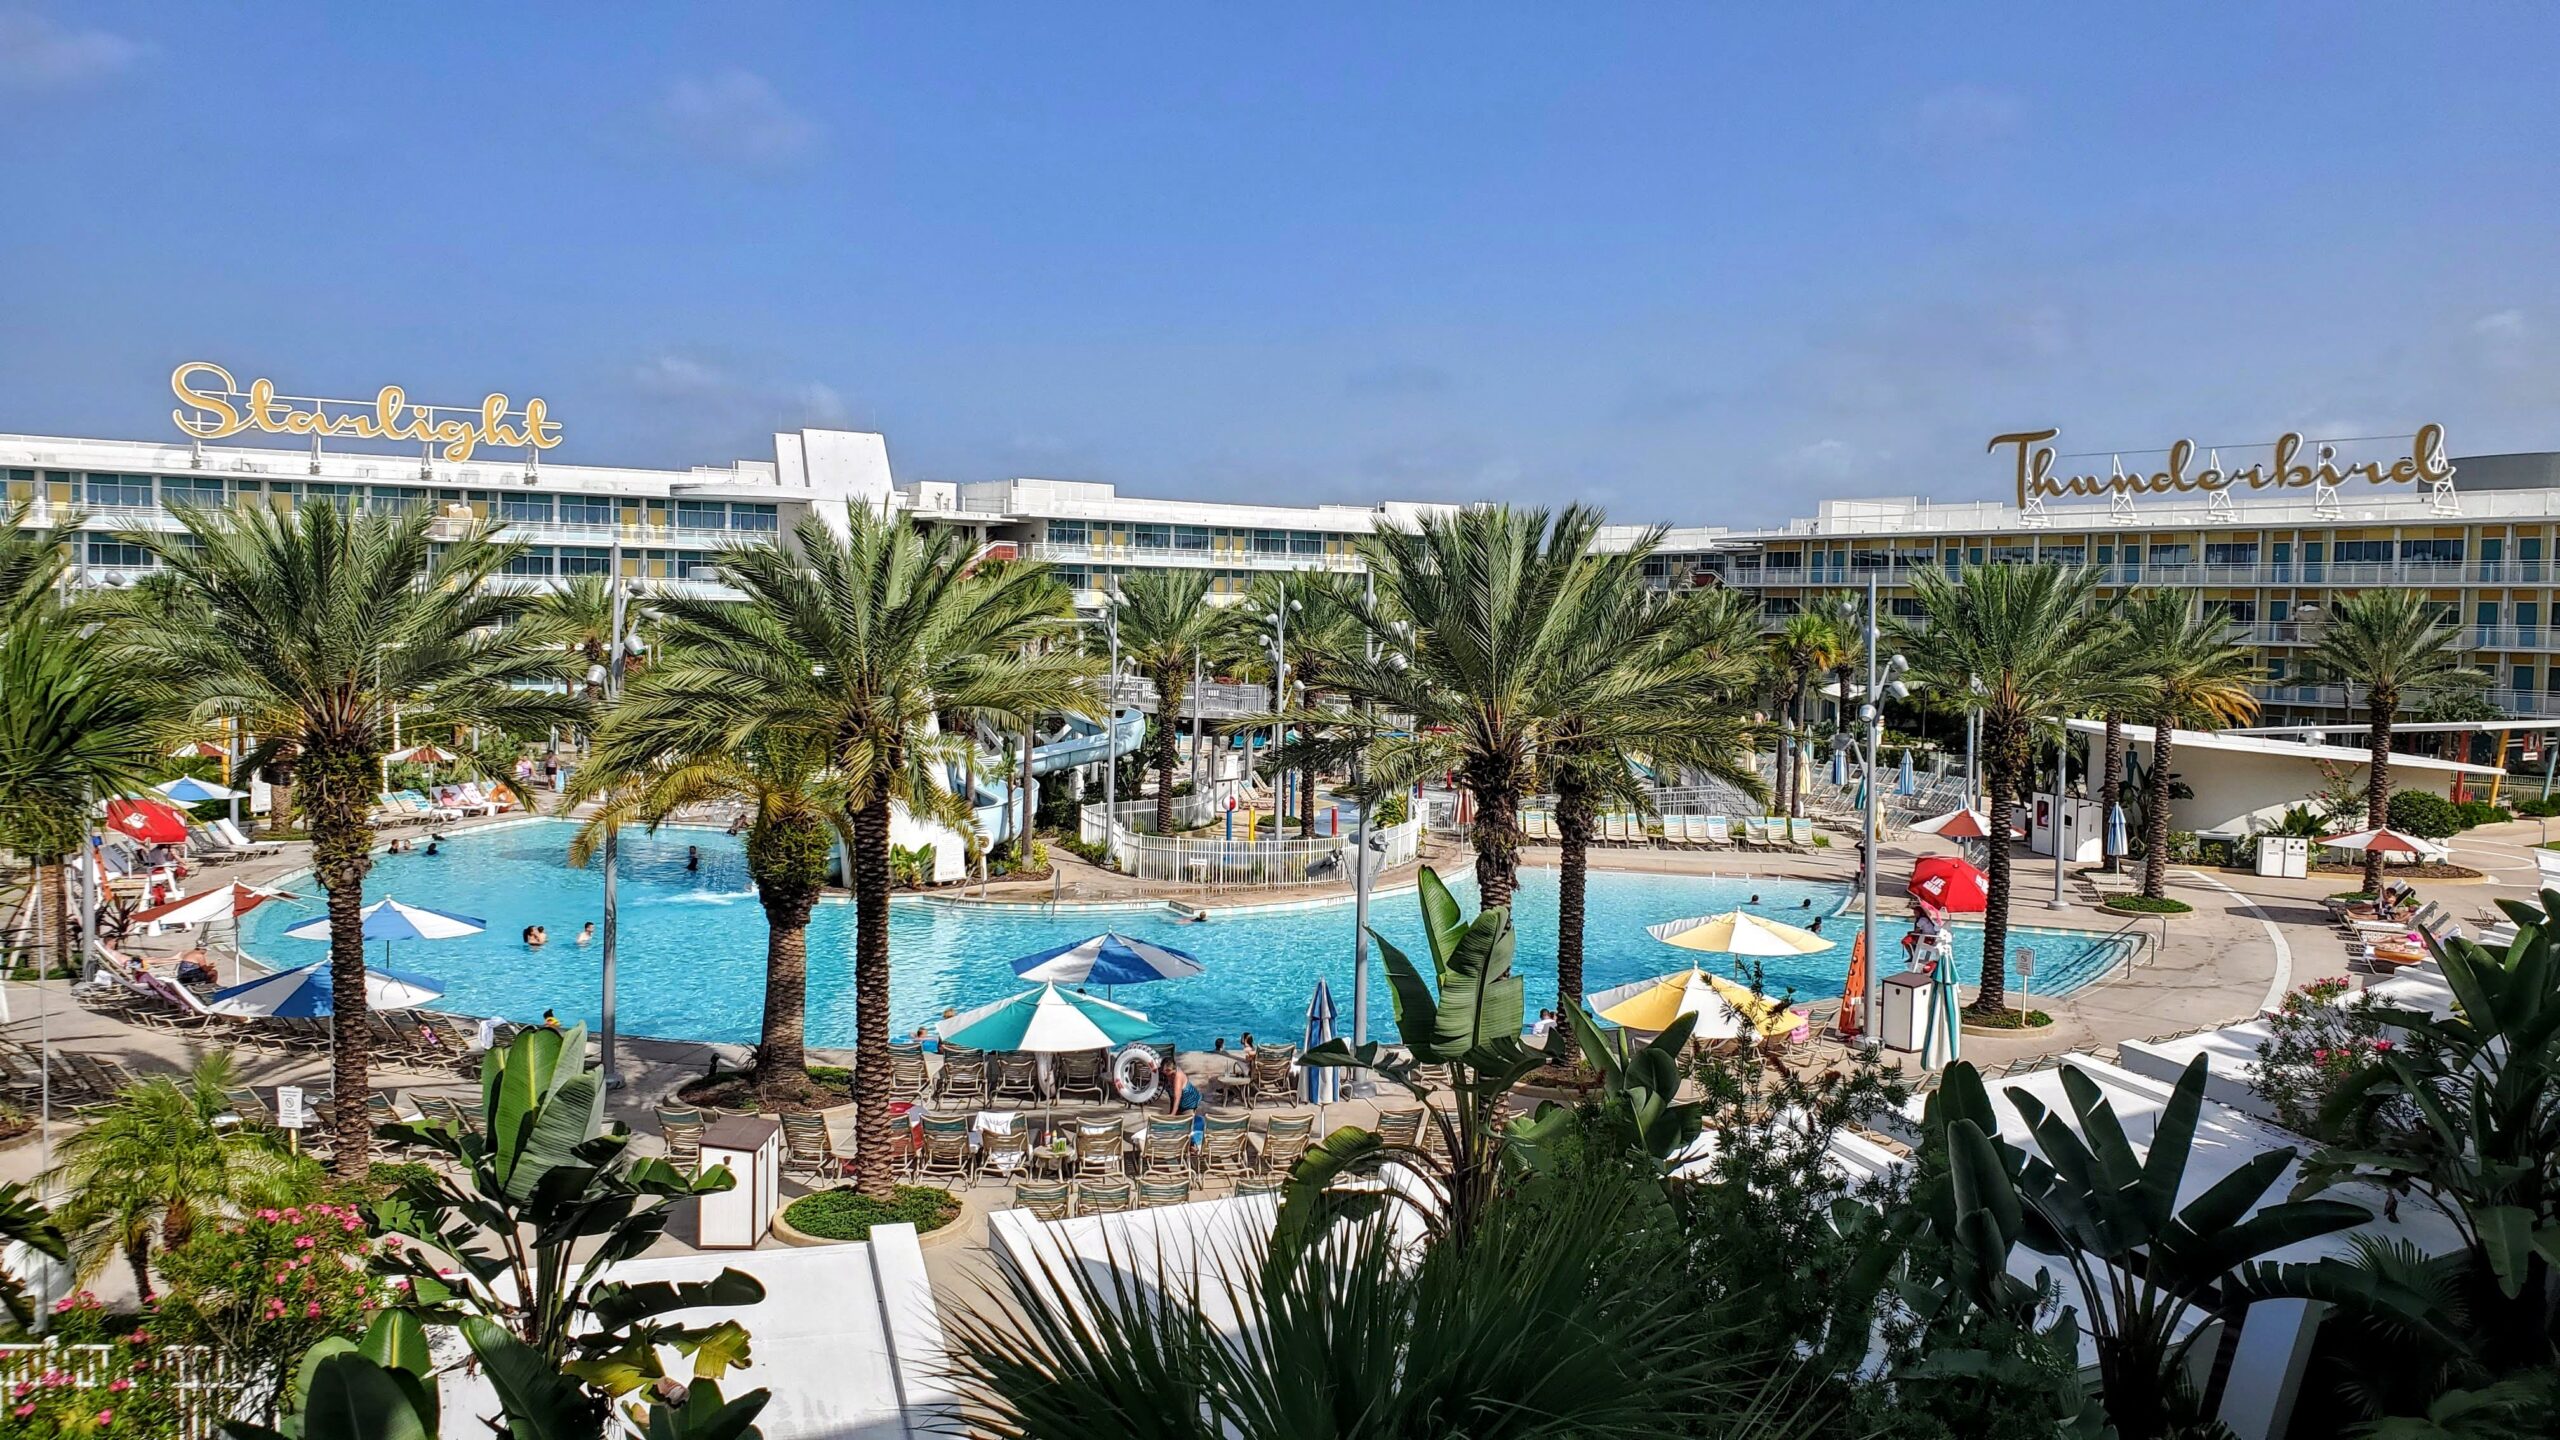 the pool at cabana bay beach resort along with the hotel buildings and palm trees